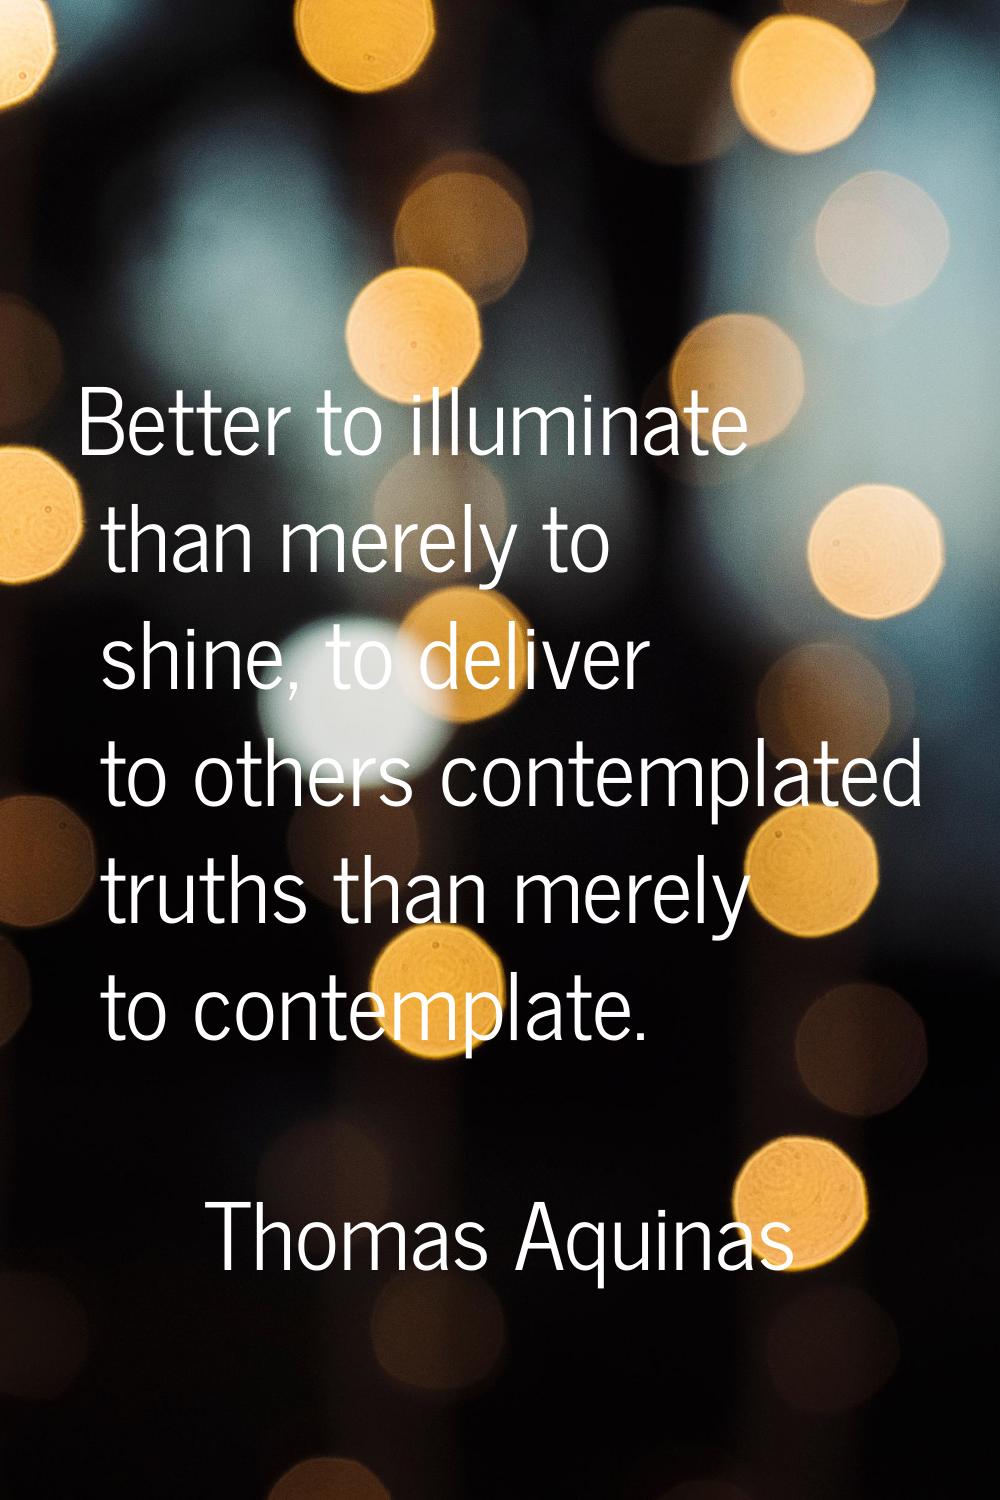 Better to illuminate than merely to shine, to deliver to others contemplated truths than merely to 